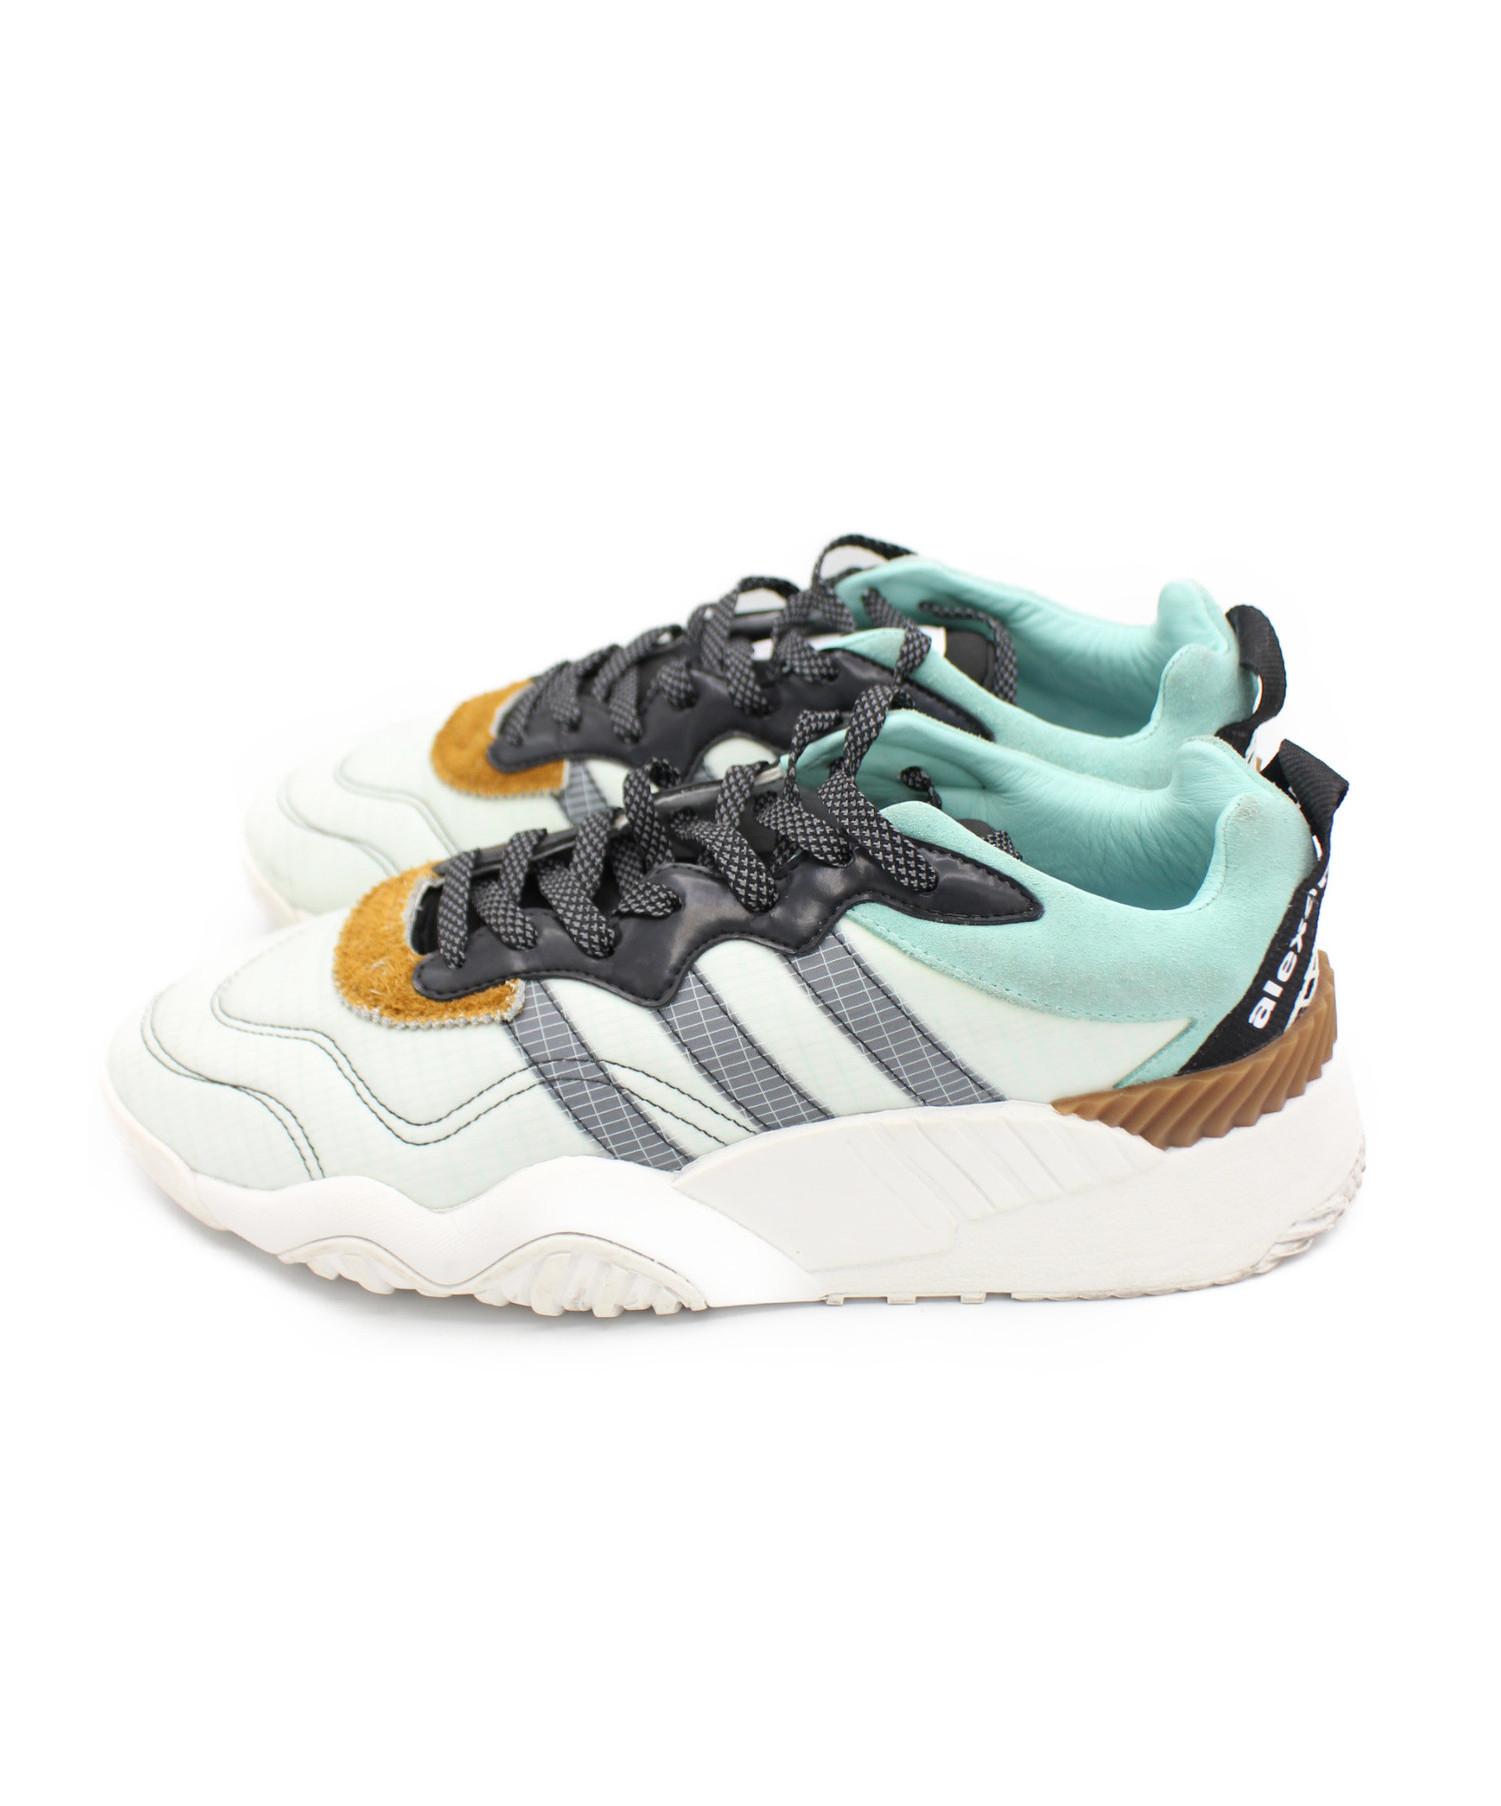 ADIDAS AW TURNOUT TRAINER 26.5cm